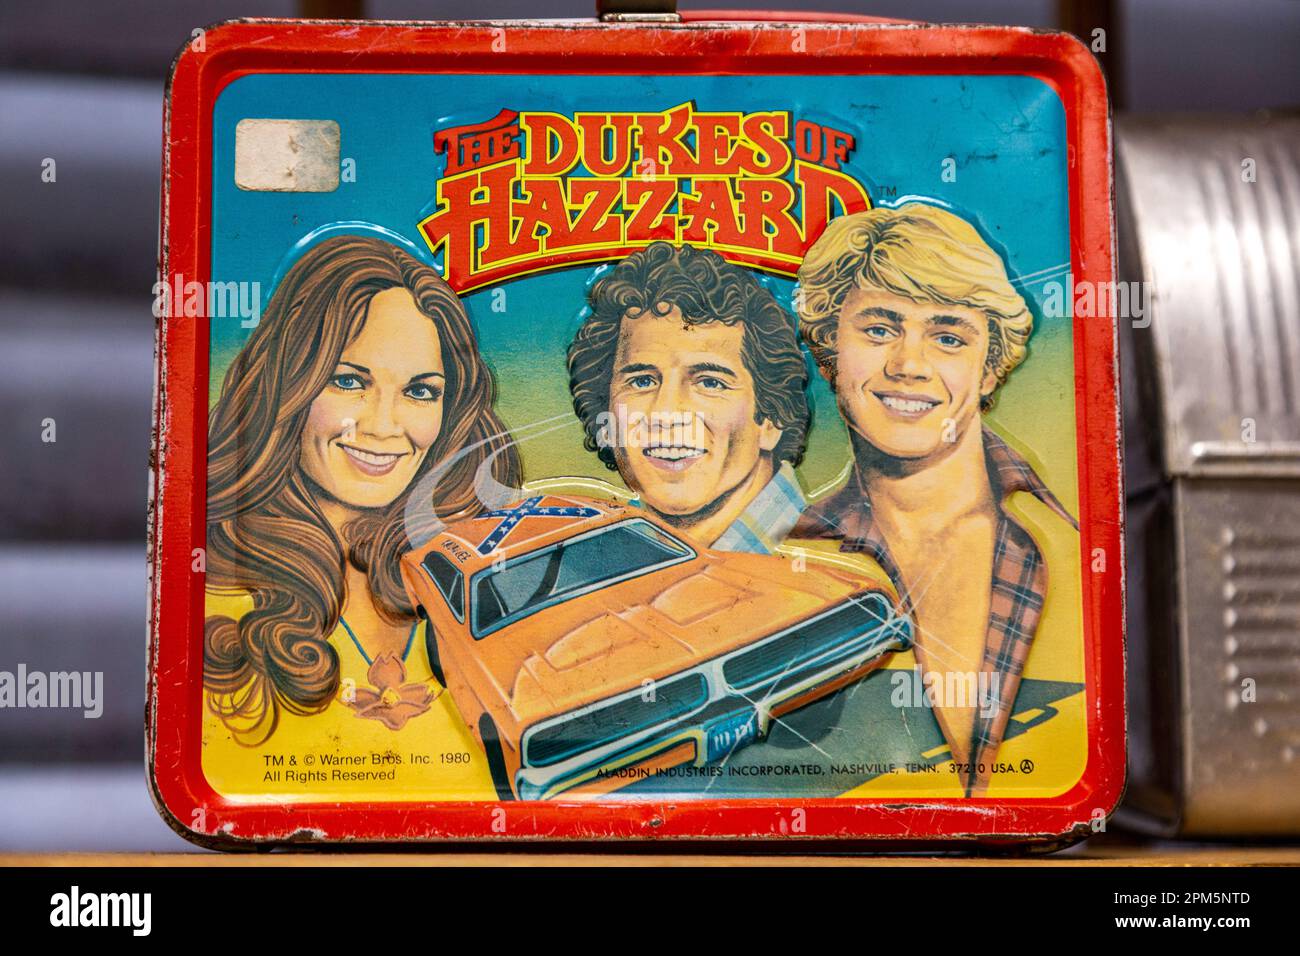 A photo of a vintage 1980 lunchbox featuring the General Lee, Daisy, Luke and Bo Duke, the television series Dukes of Hazzard. Stock Photo